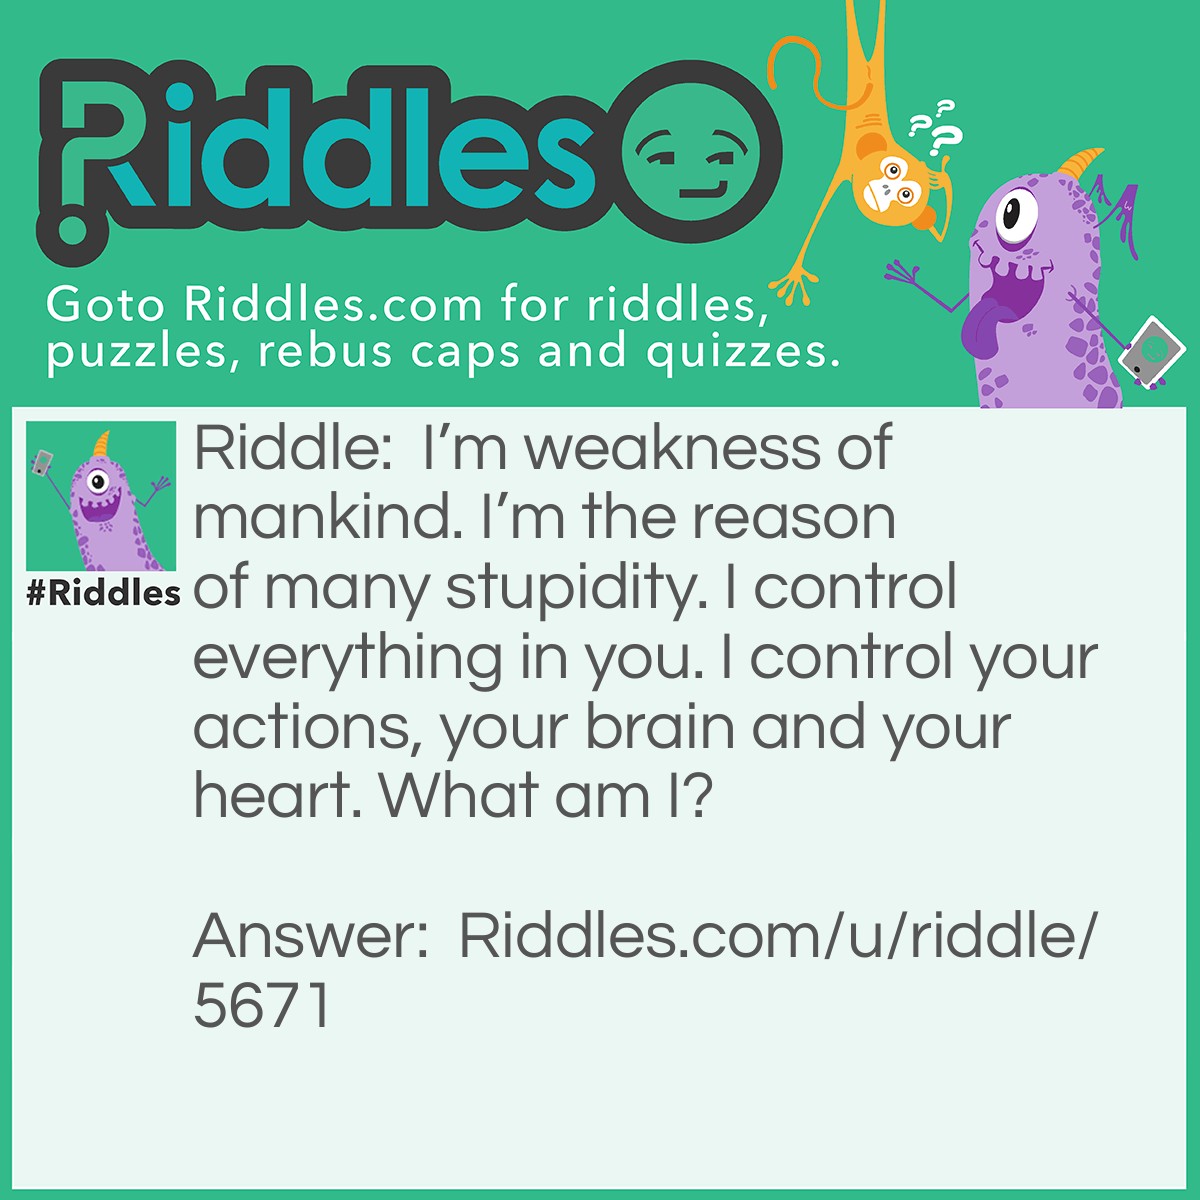 Riddle: I'm weakness of mankind. I'm the reason of many stupidity. I control everything in you. I control your actions, your brain and your heart. What am I? Answer: The emotions.